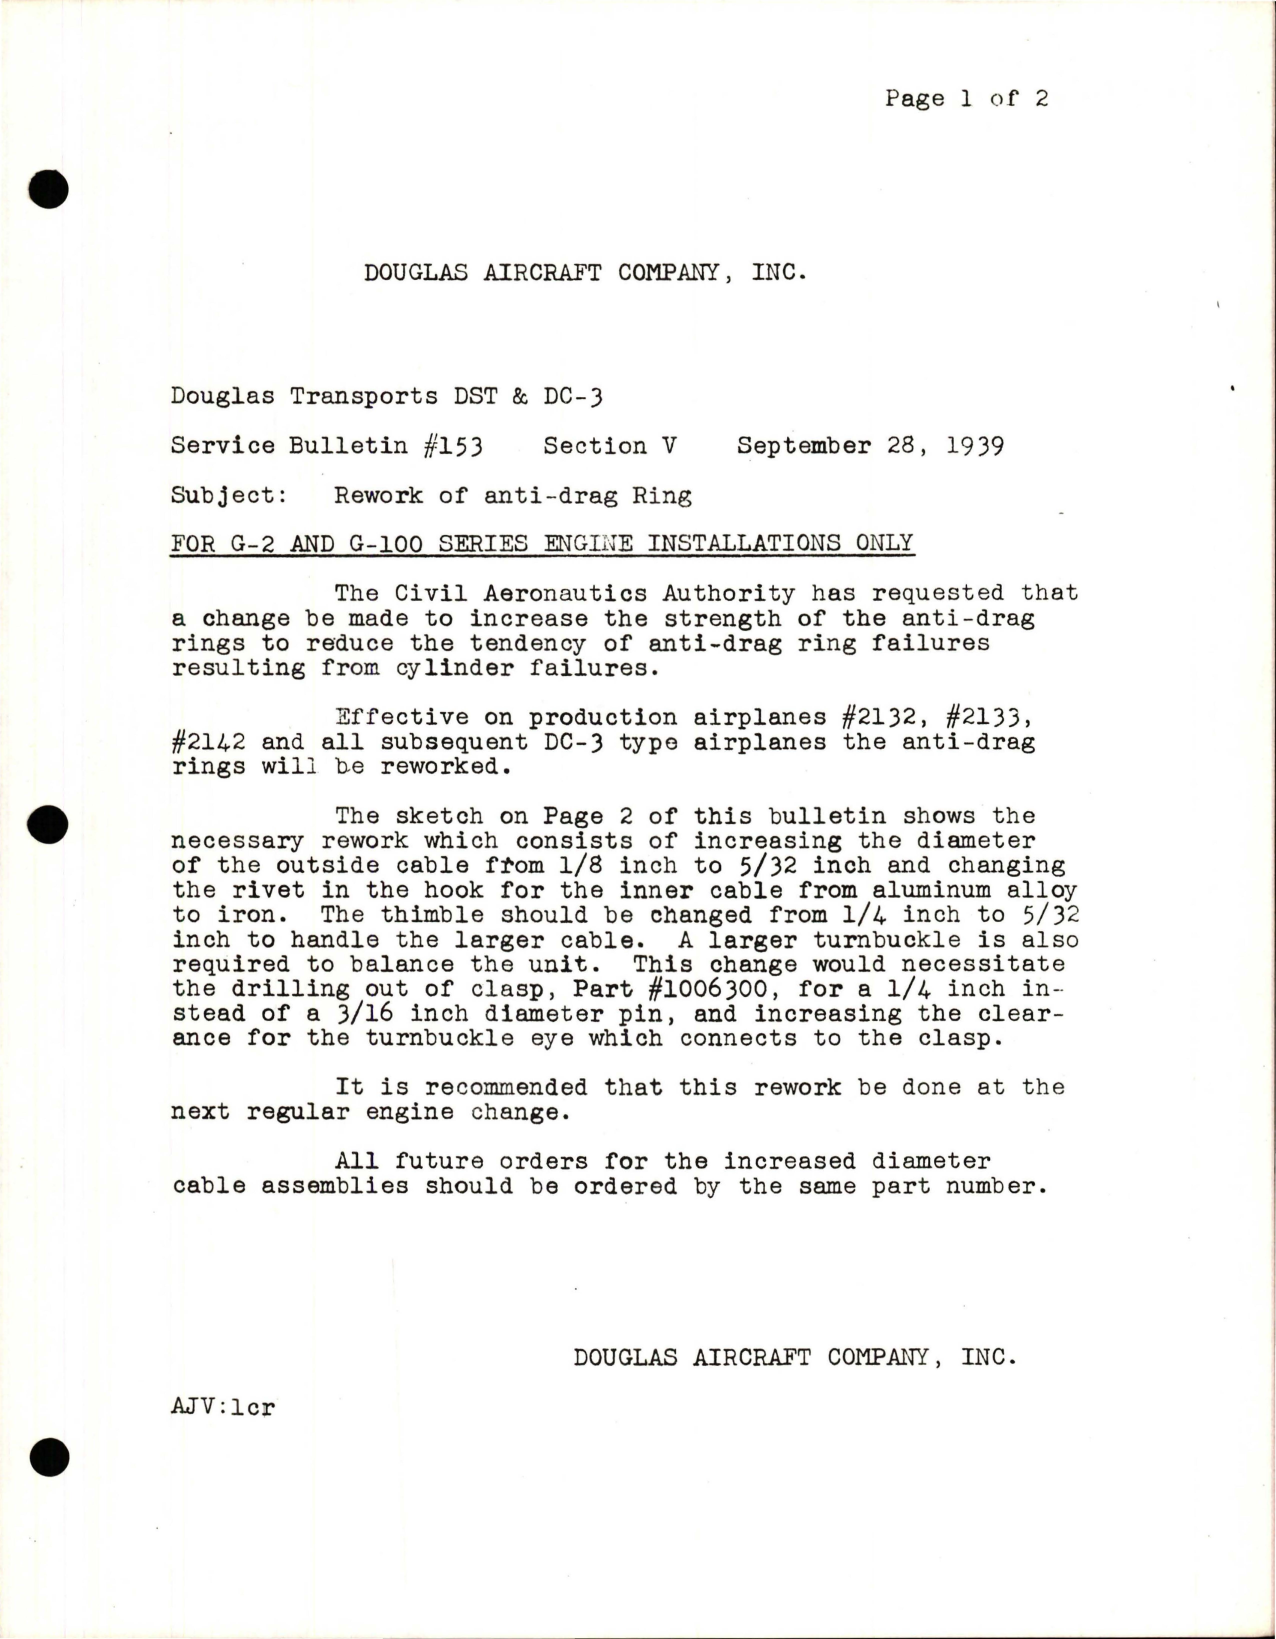 Sample page 1 from AirCorps Library document: Rework of Anti-Drag Ring